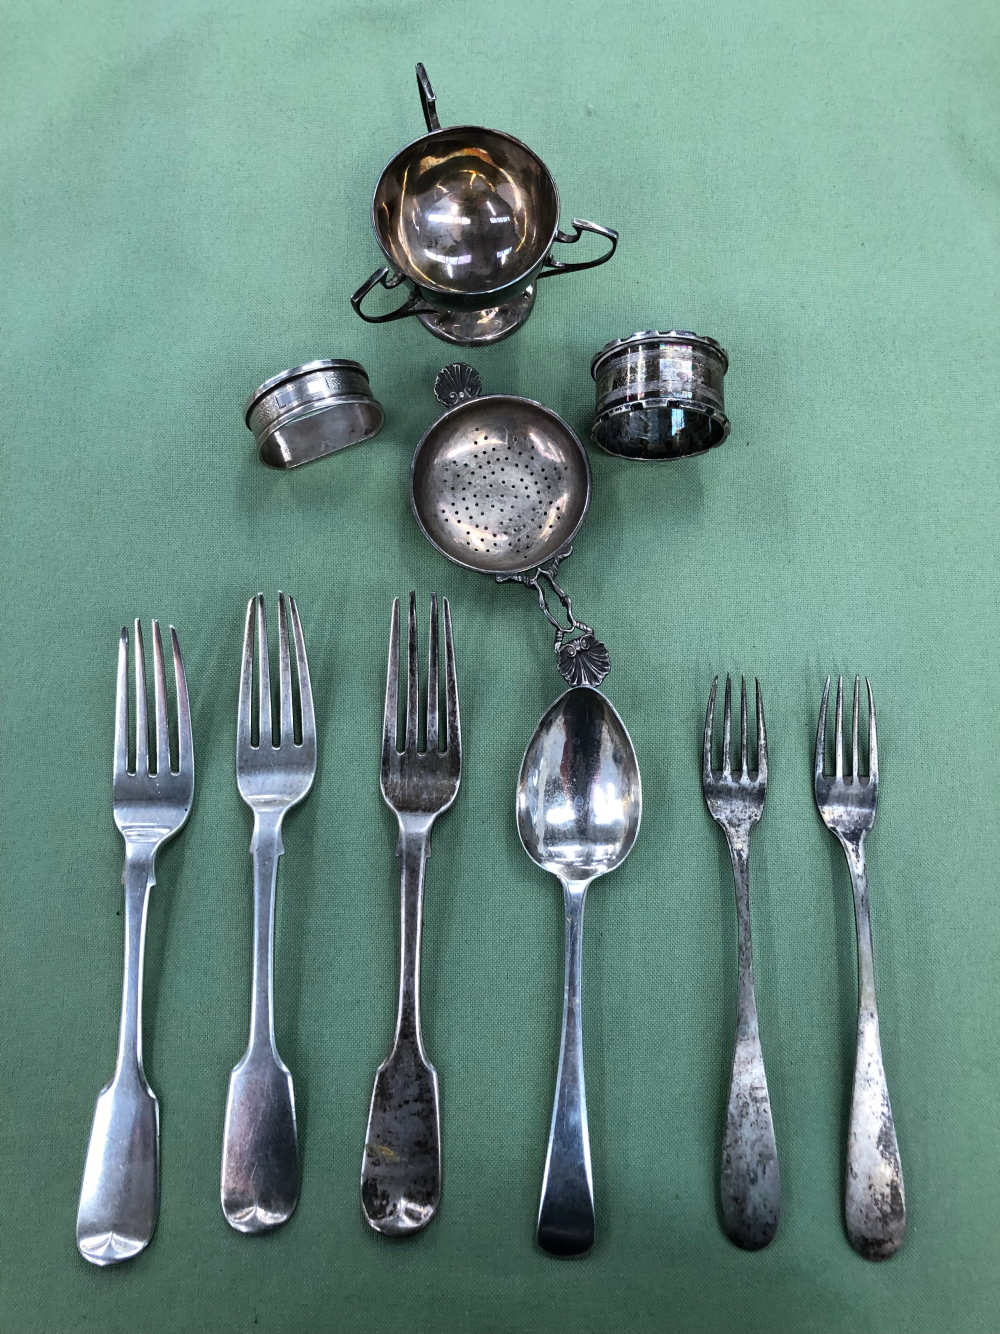 THREE HALLMARKED SILVER TABLE FORKS , LONDON 1830, A DESERT SPOON C. 1780, TWO CONTINENTAL FORKS ,